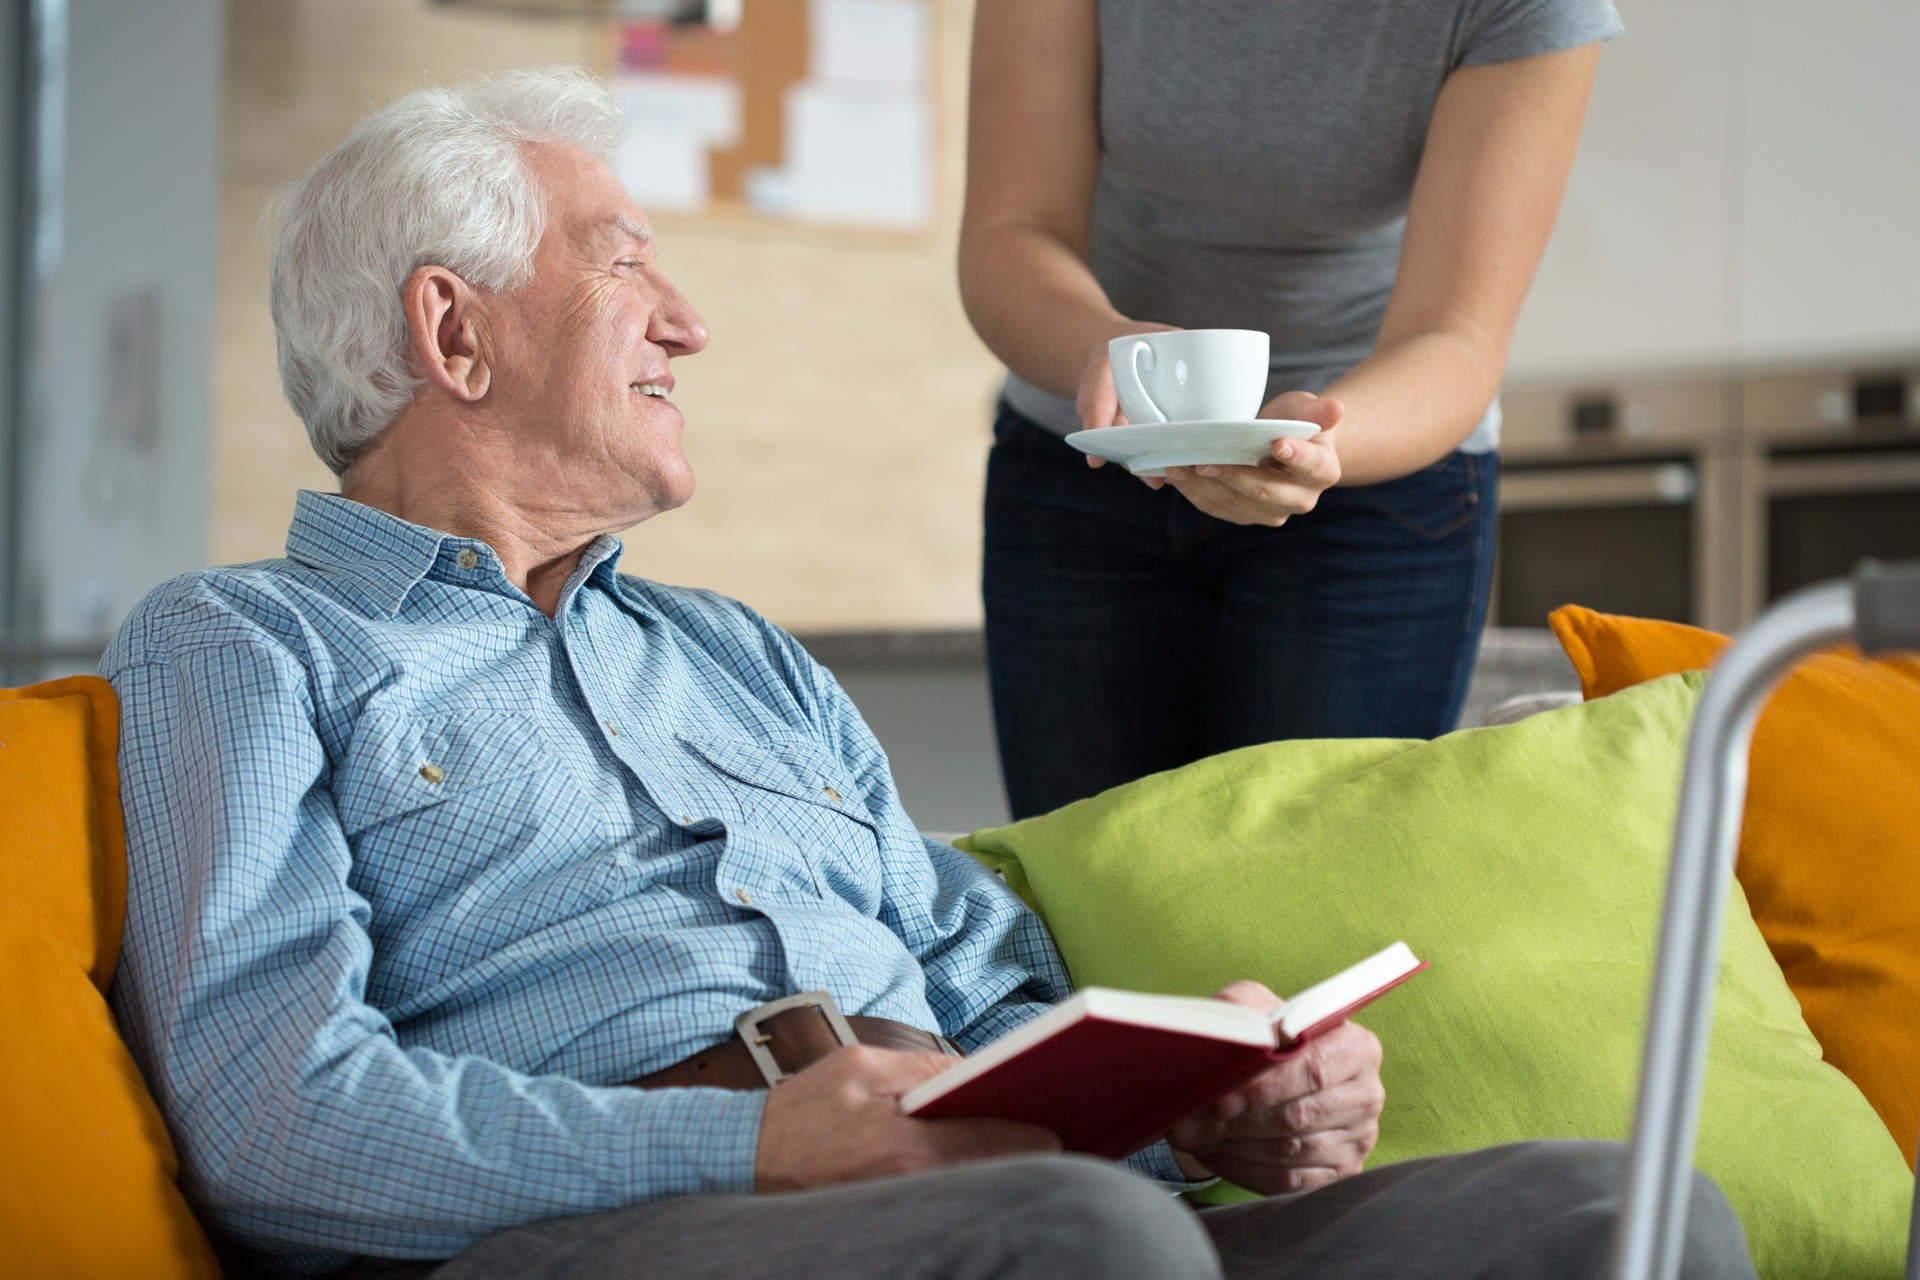 Important tips for dementia caregivers